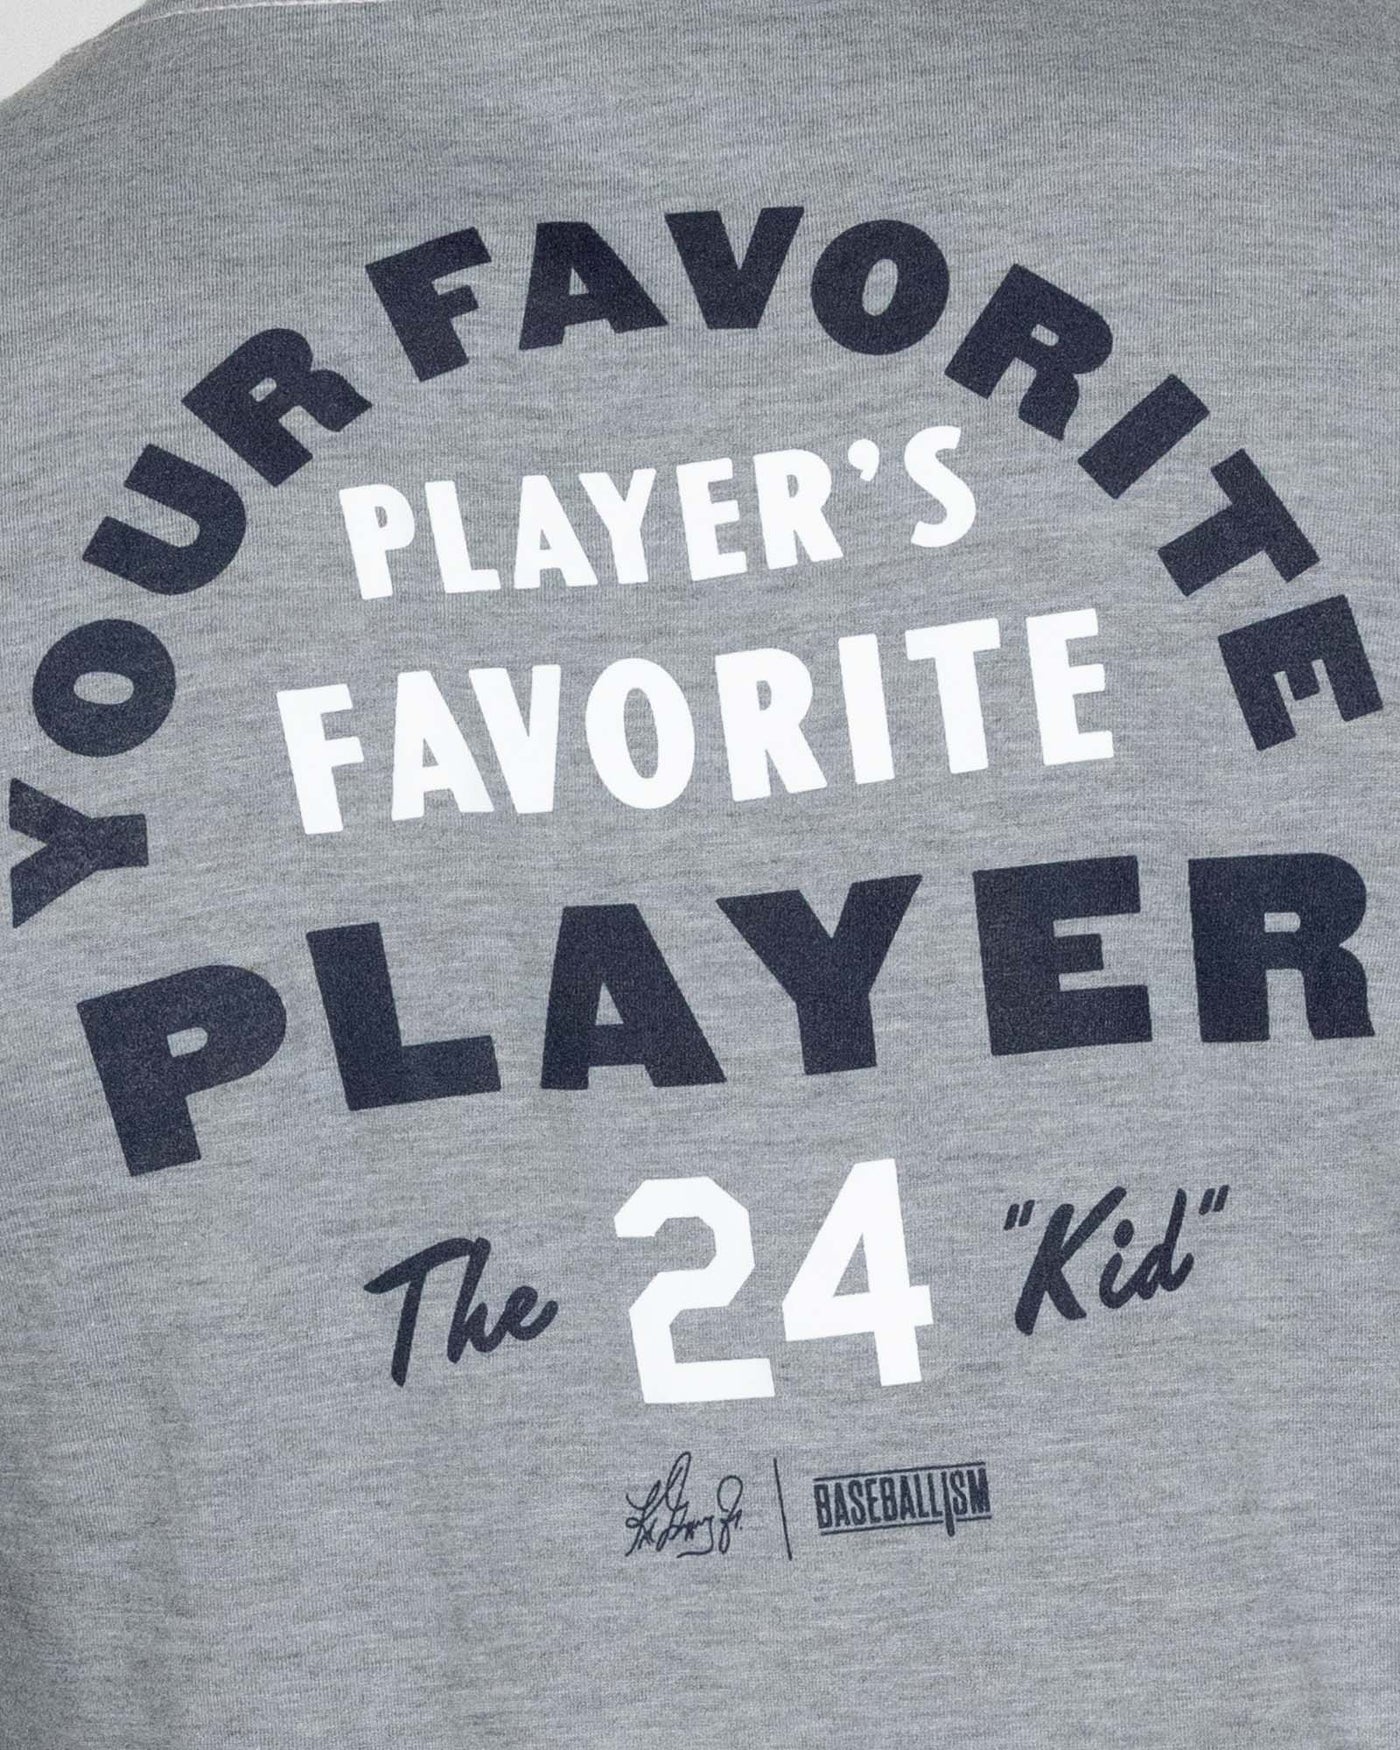 Your Favorite Player Long Sleeve - Ken Griffey Jr. Collection